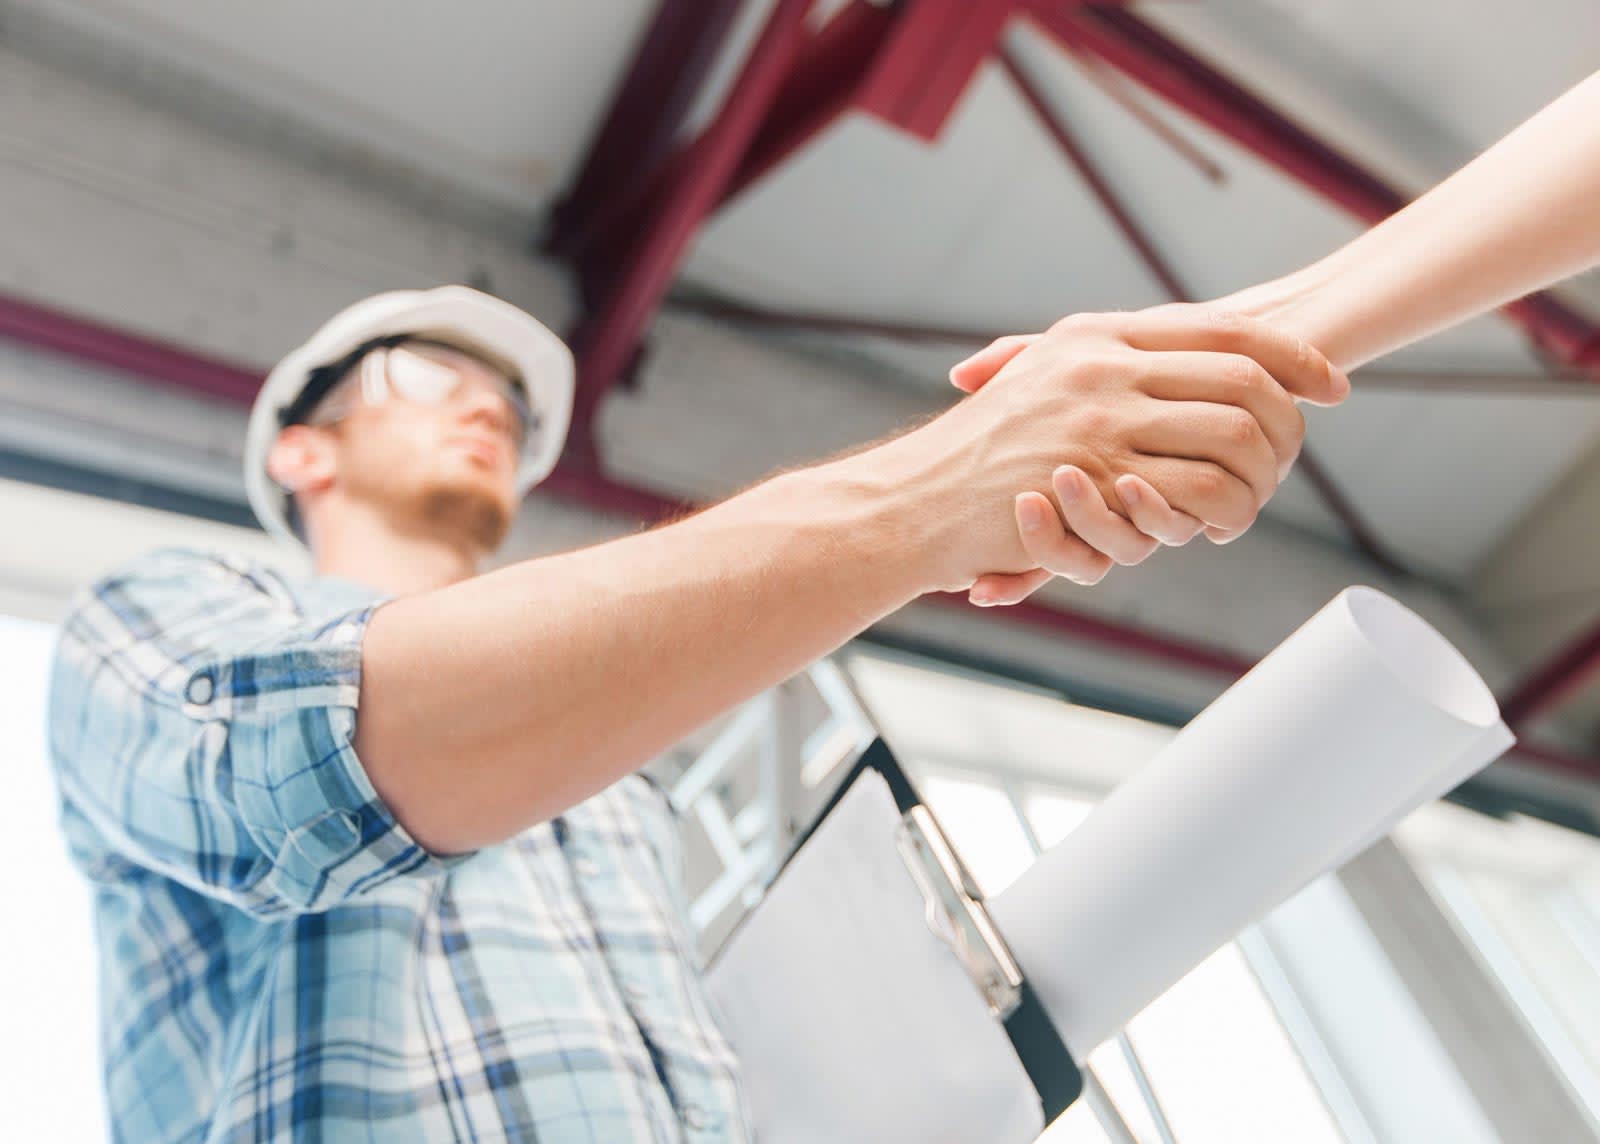 Find a general contractor near you